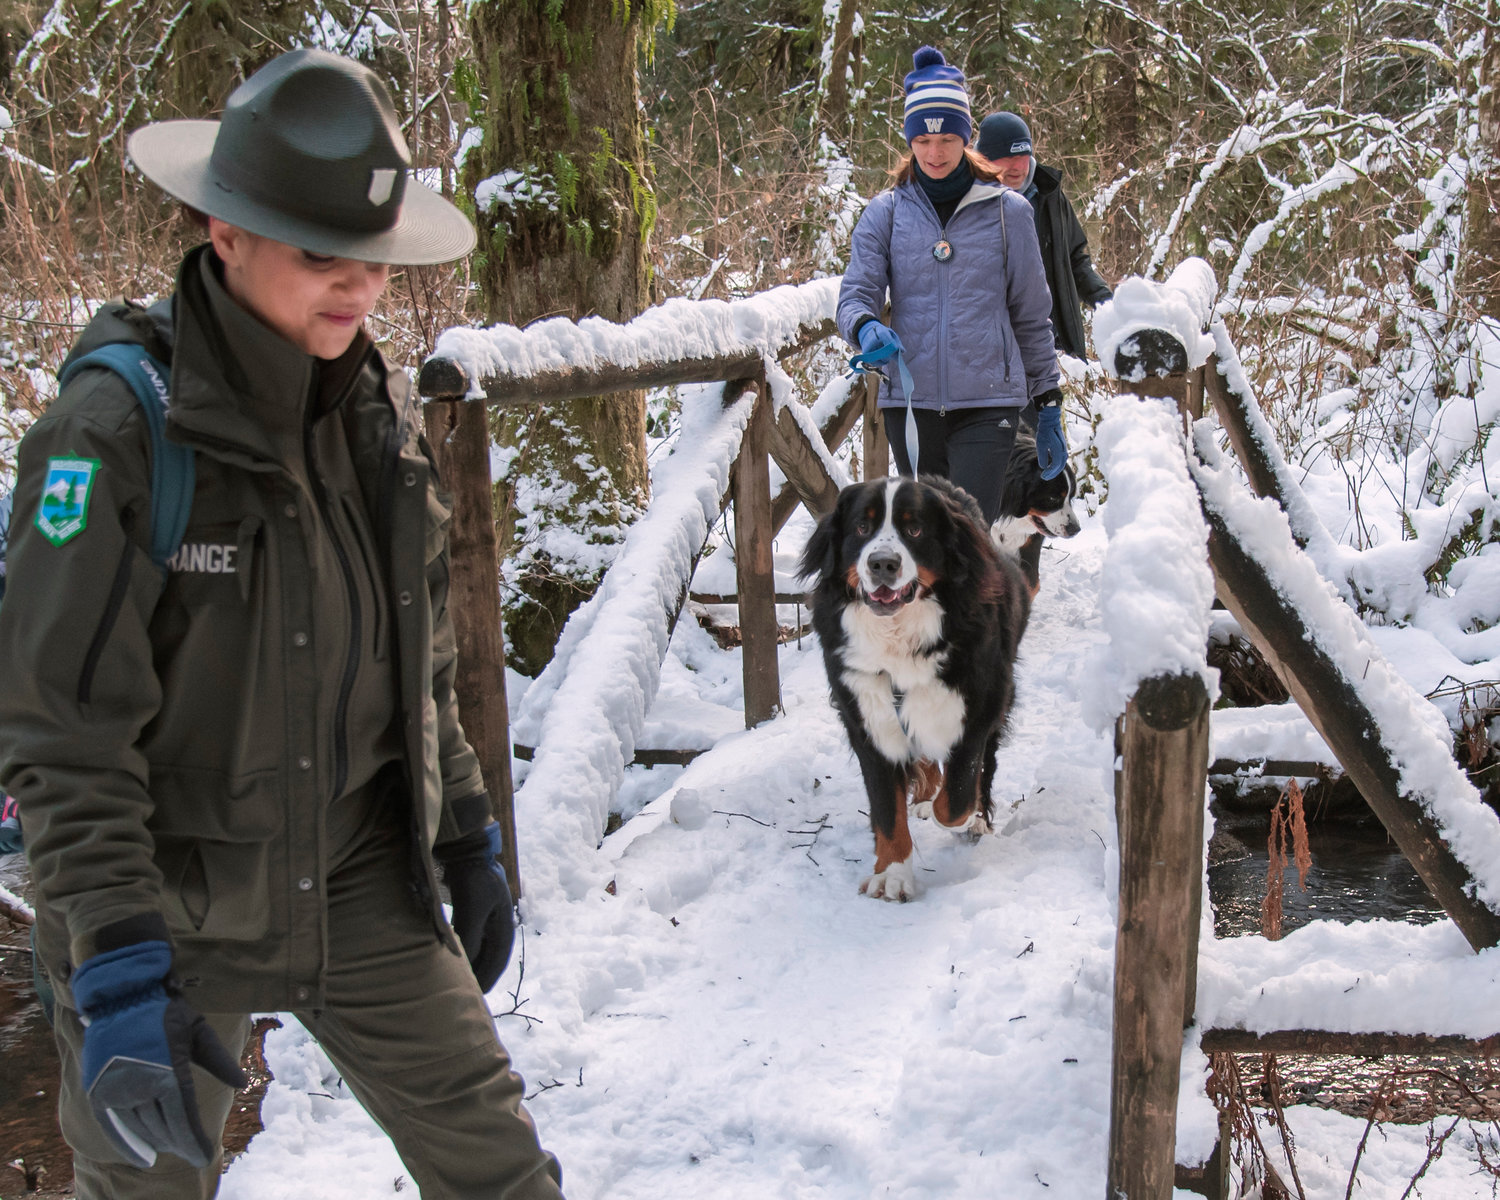 Rangers lead first day hikers and their canine companions along a snowy trail at Lewis and Clark State Park in Toledo on Saturday.